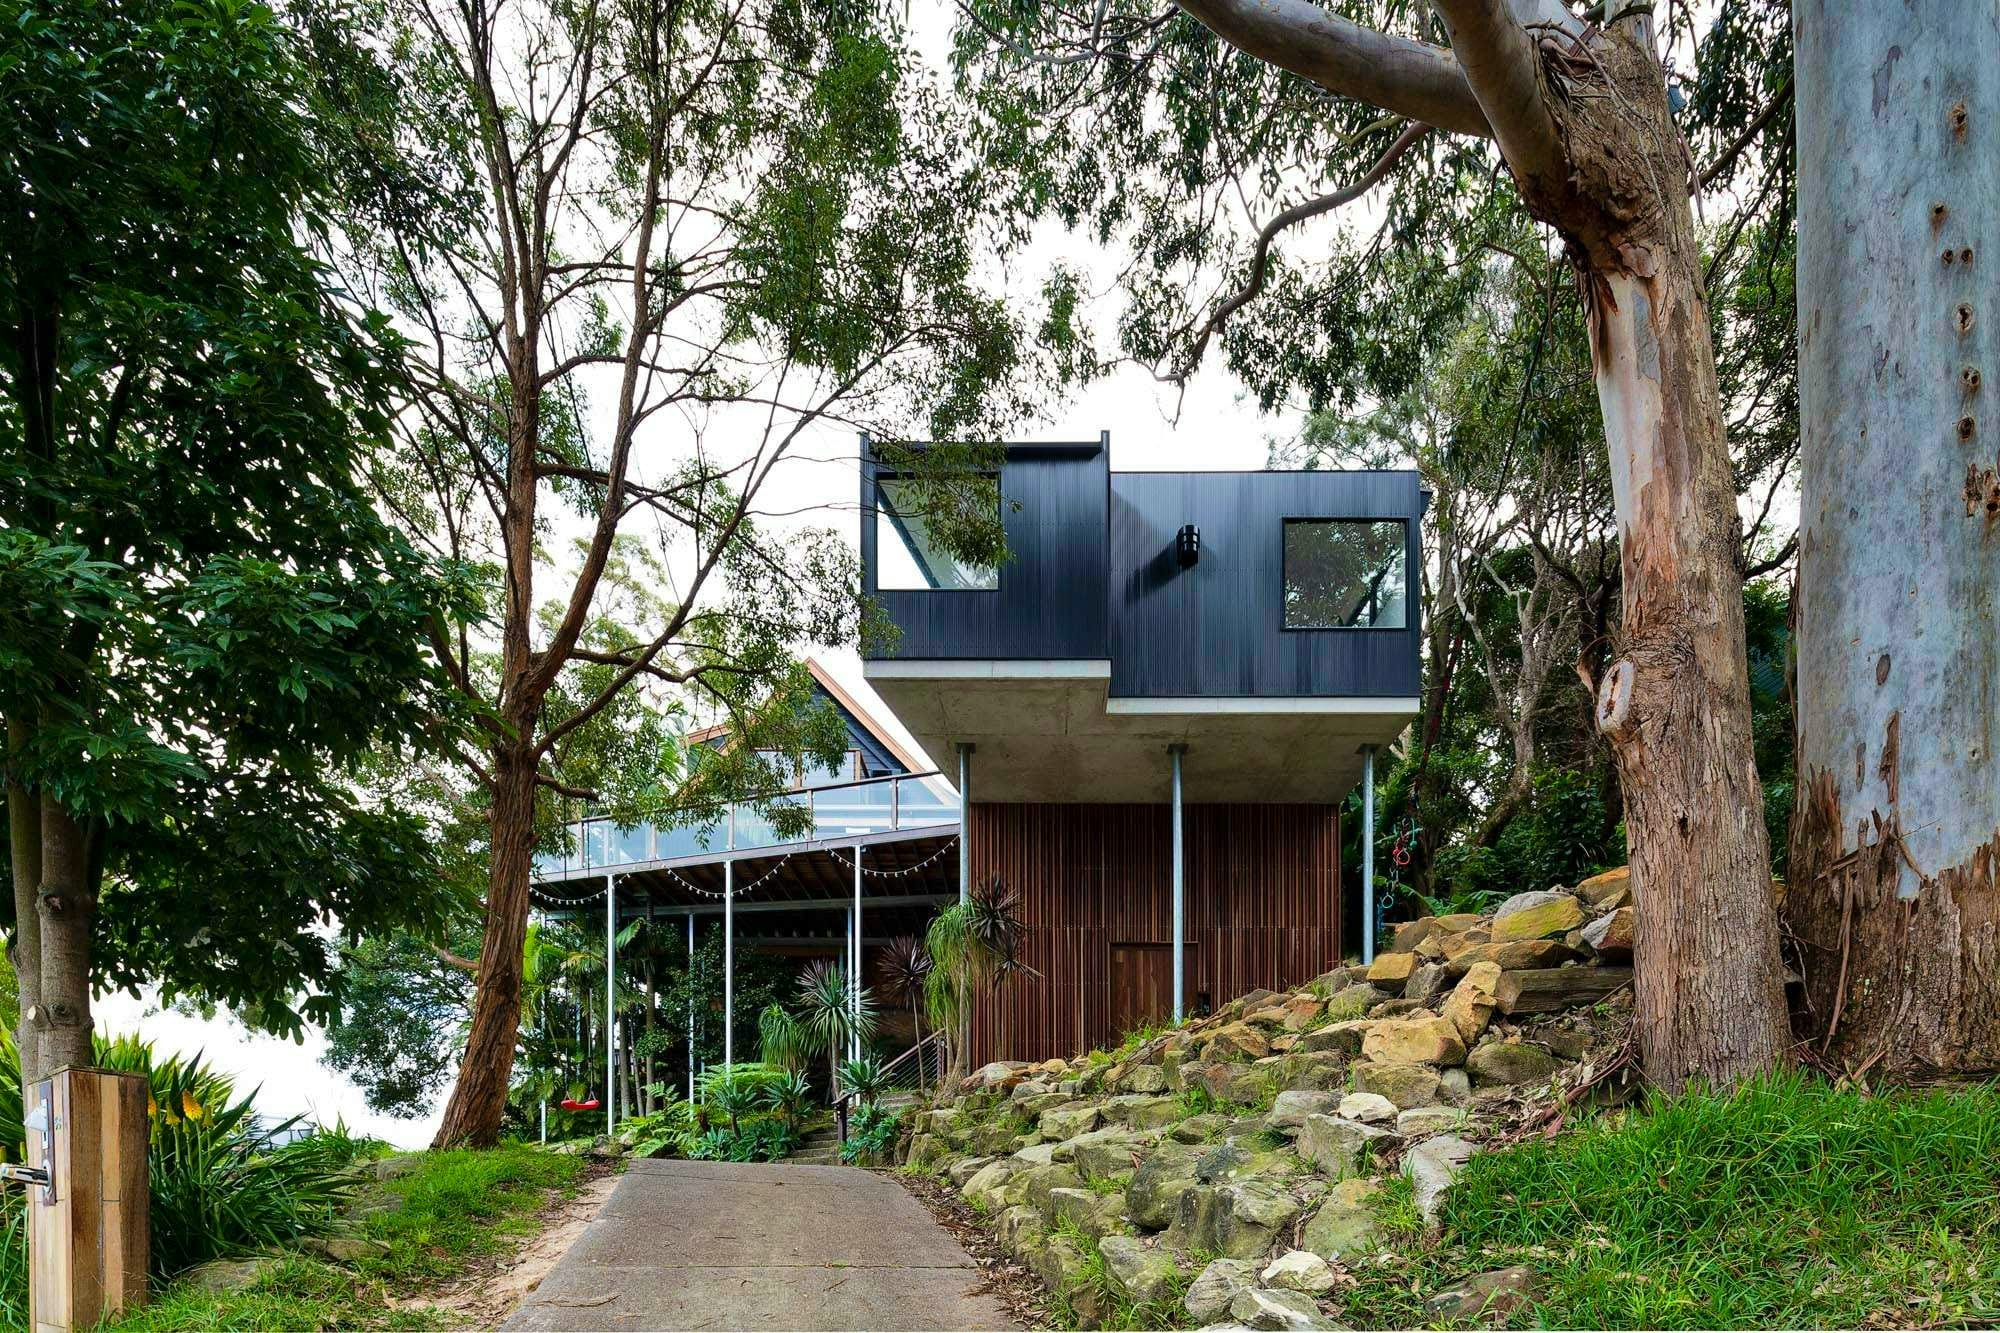 Waine Street by North by North. Photography by Simon Whitbread. Low facade of double storey home on stilts with raw timber clad on ground floor and top floor in black veneer. Tall native gum trees.